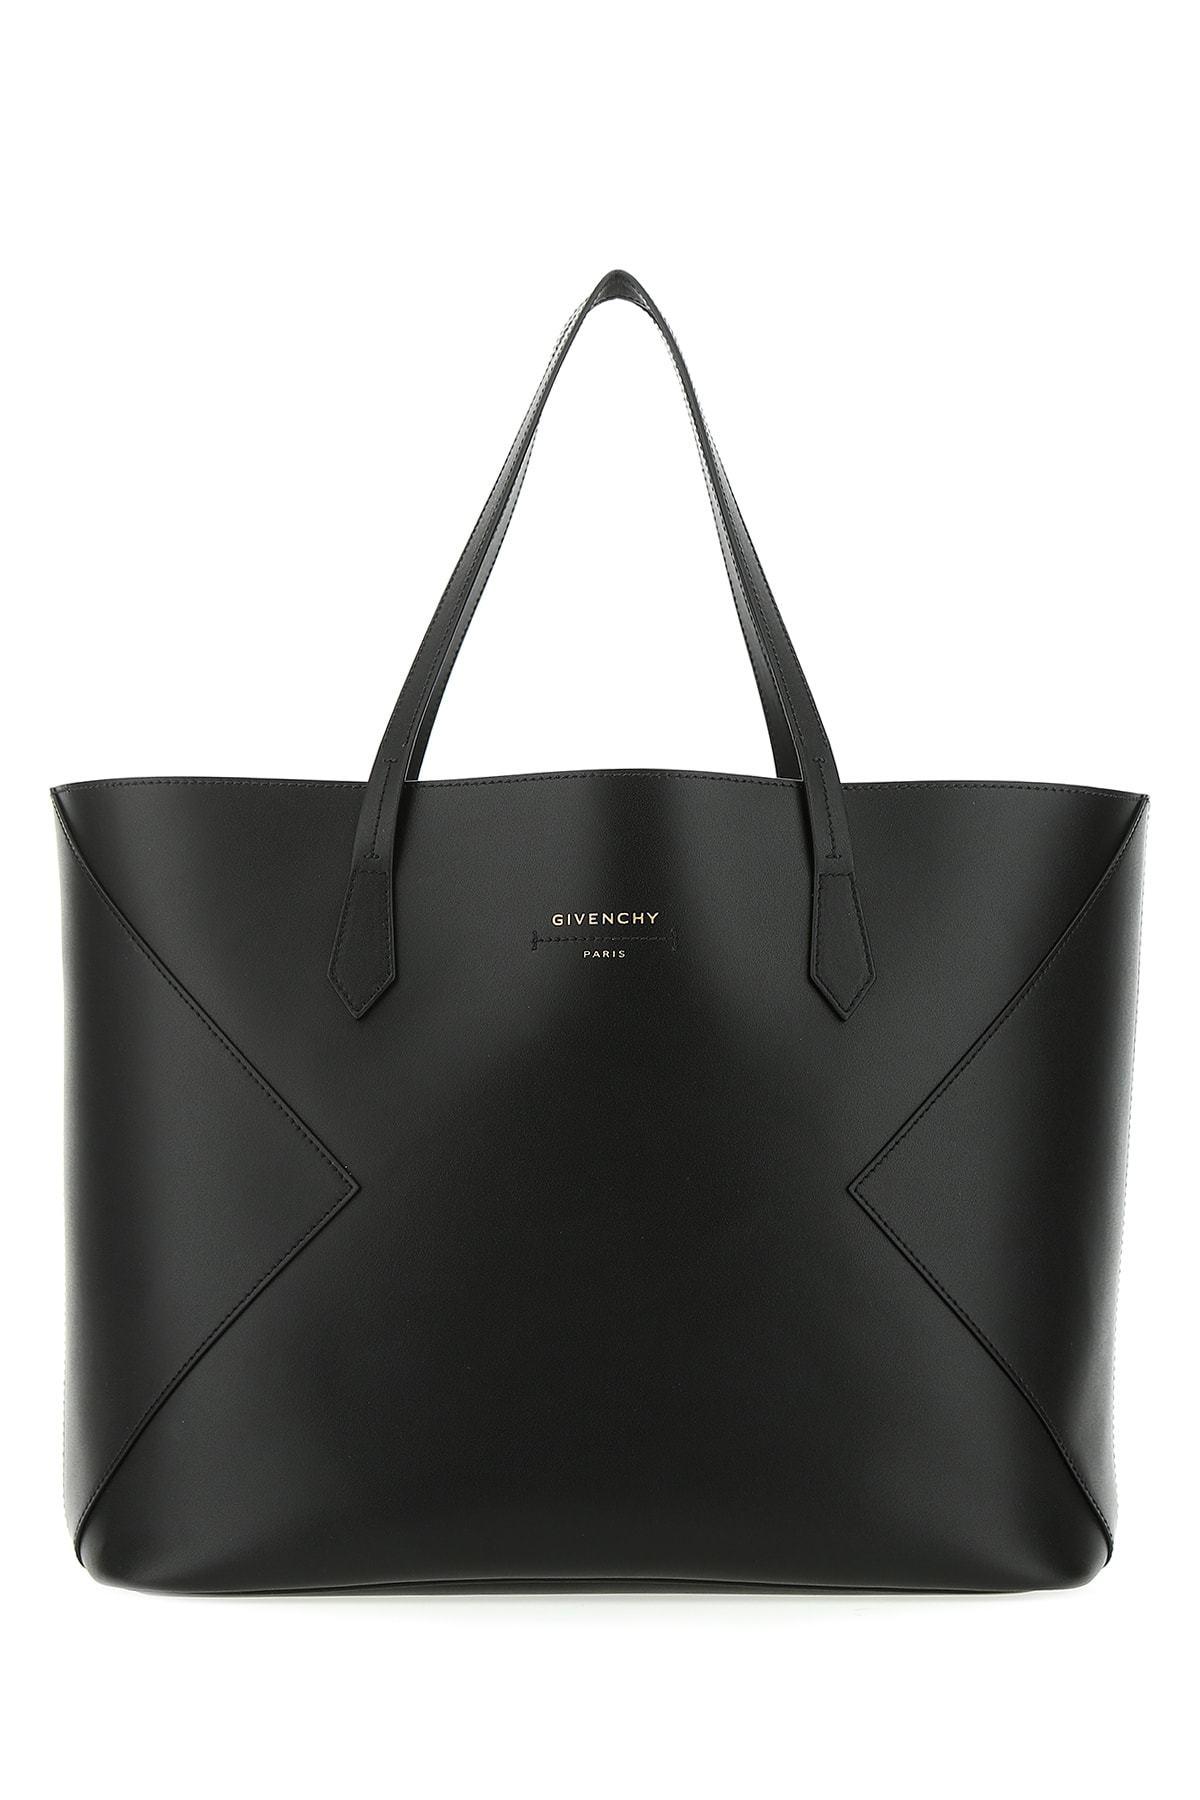 Top 51+ imagen givenchy leather tote bag